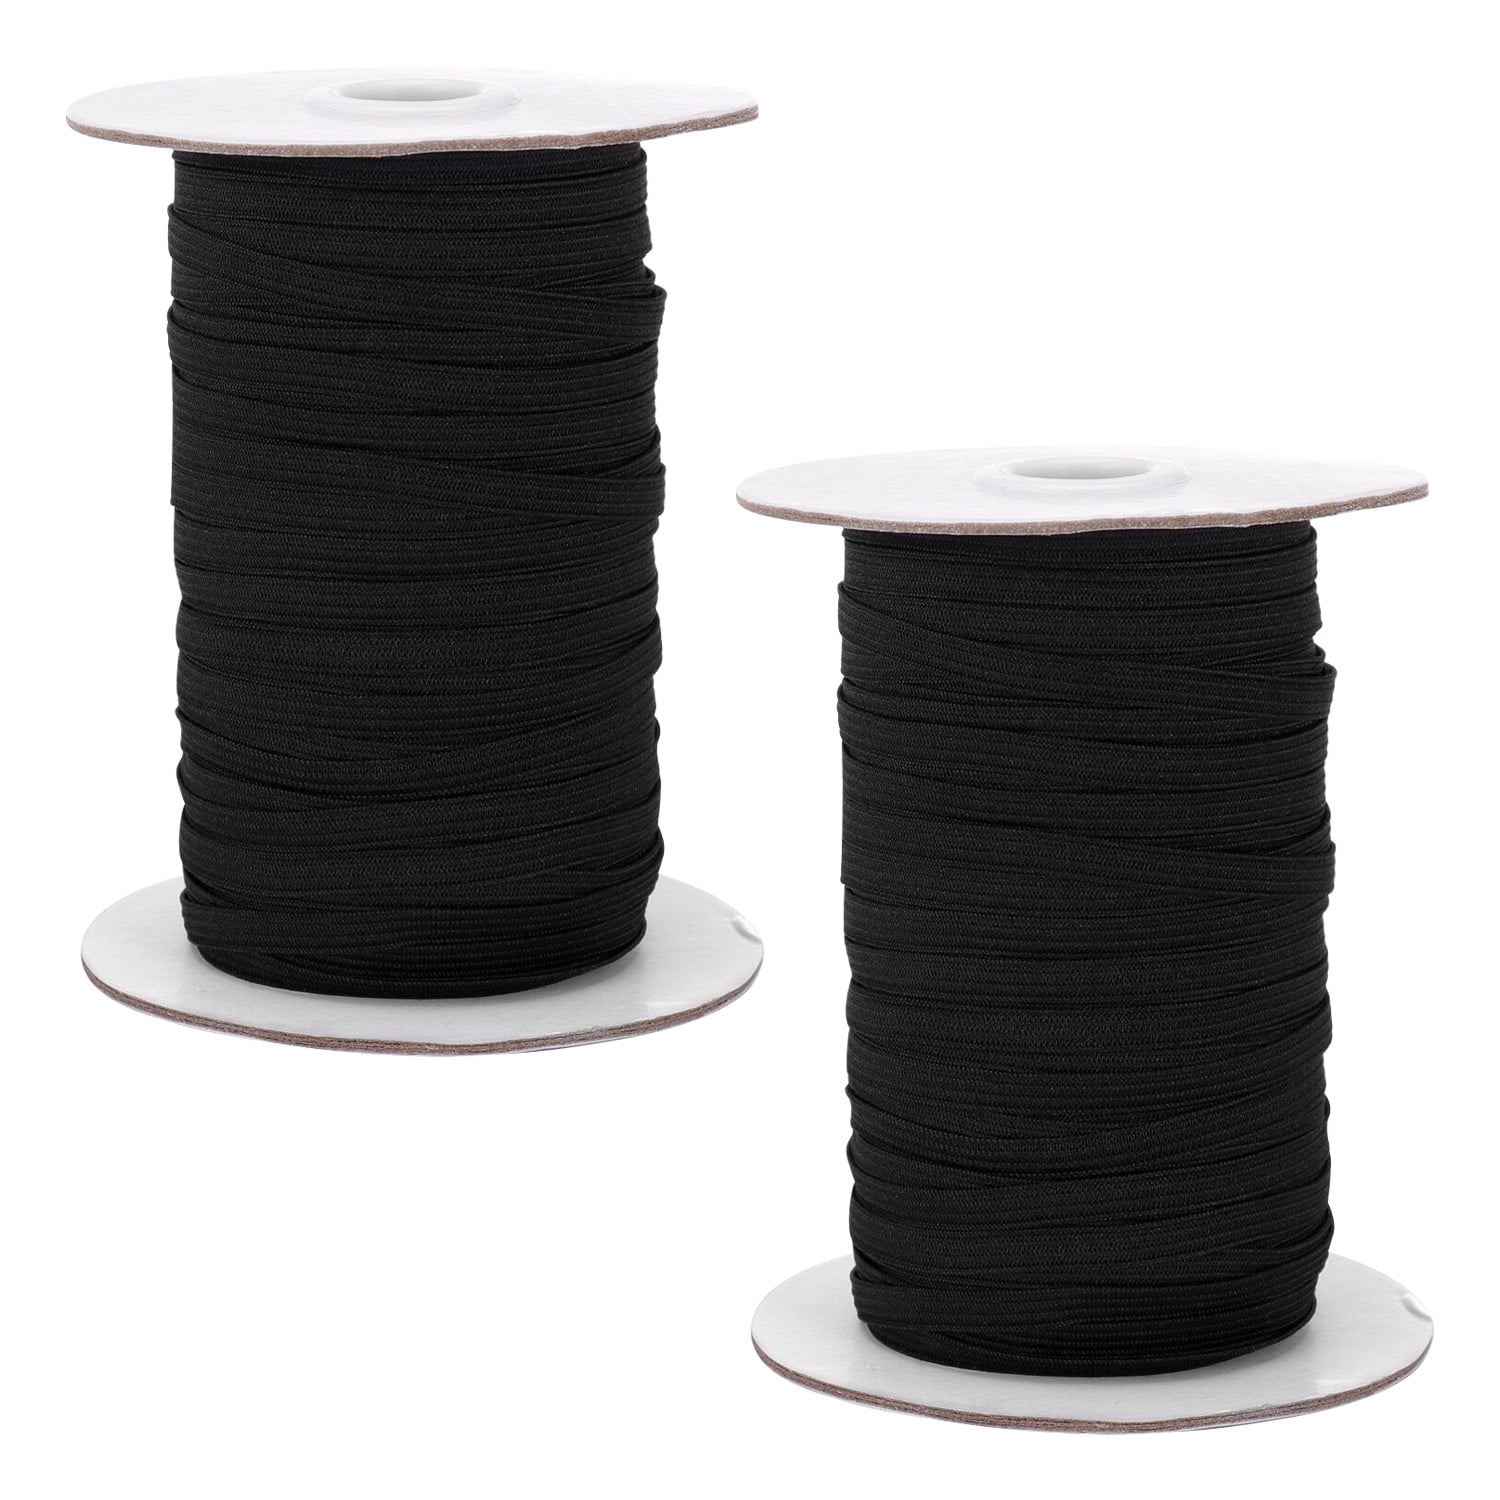 Coopay 22 Yards 1 inch High Elastic Spool Knit Elastic Bands for Sewing 2 Rolls 11 Yards/Roll (Black and White 1 inch)